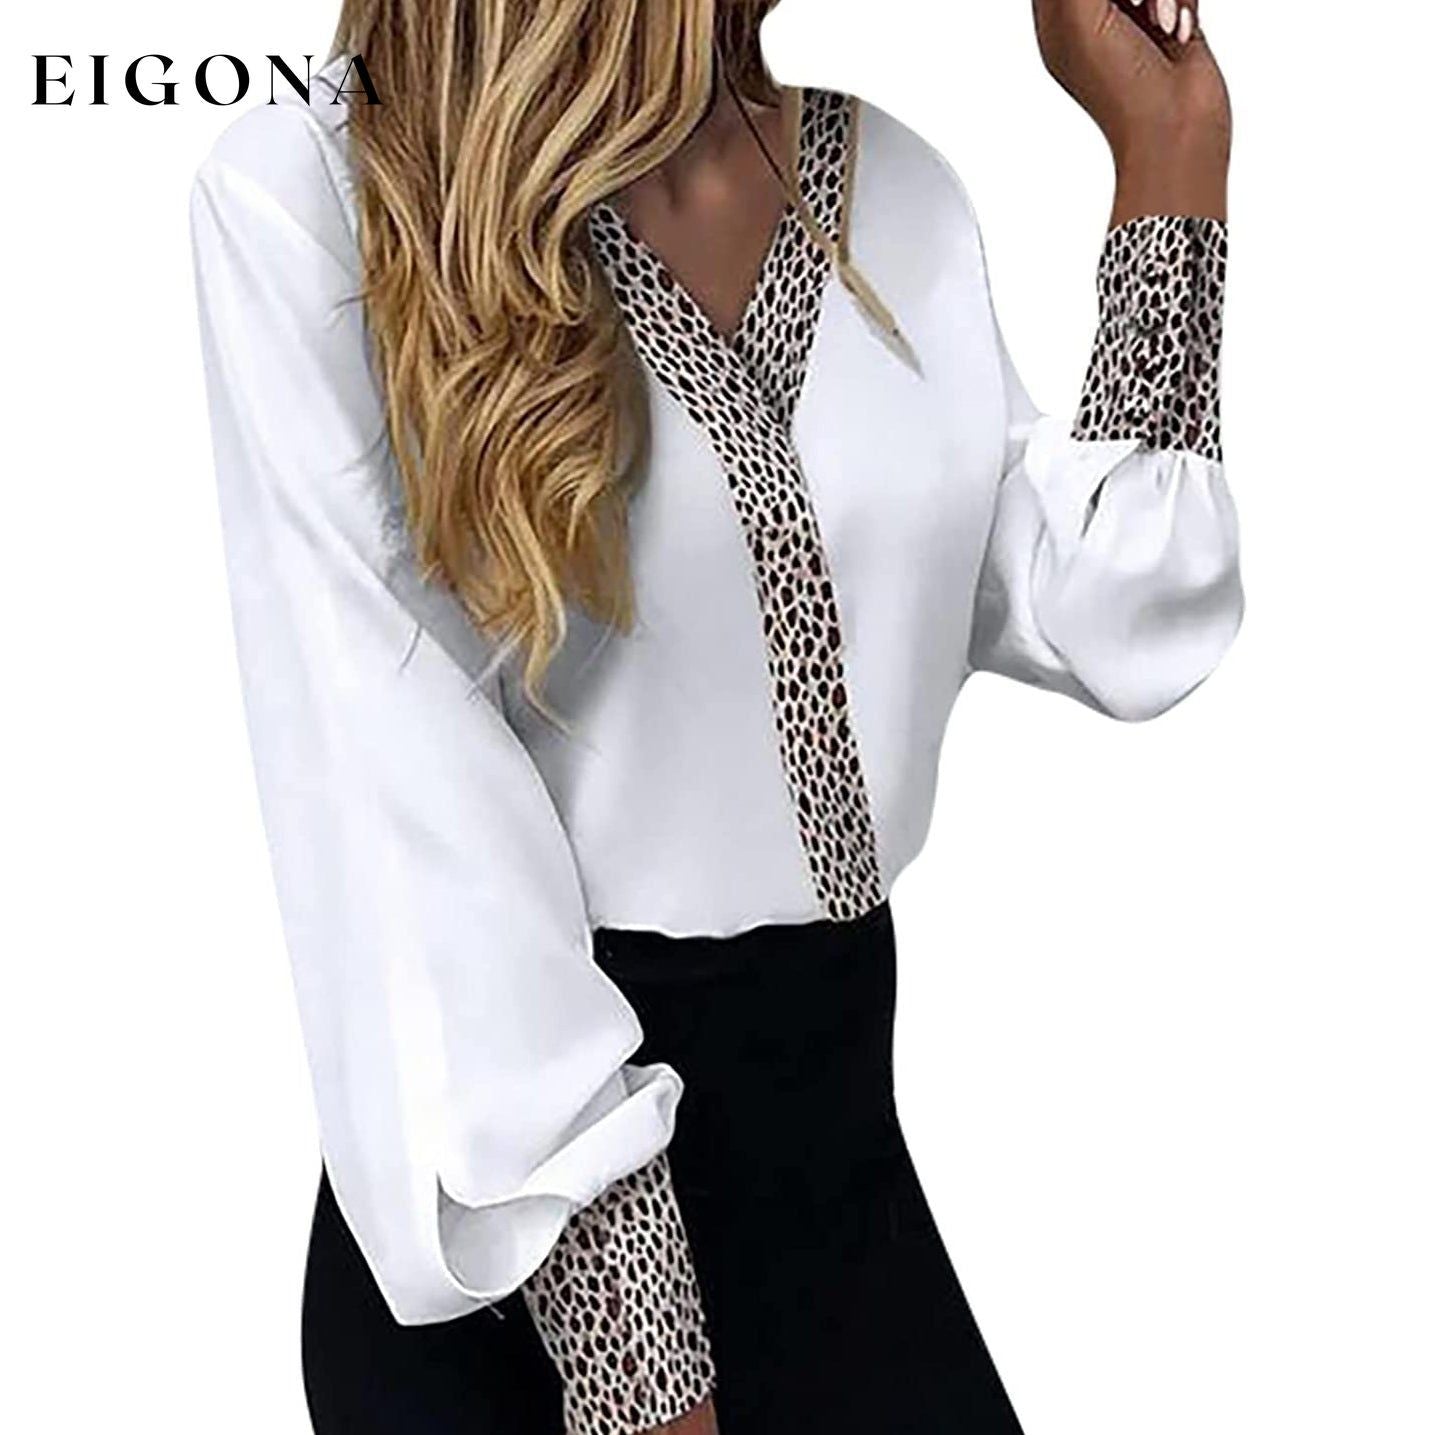 Women's Sexy Leopard Print Shirt __stock:200 clothes refund_fee:800 tops